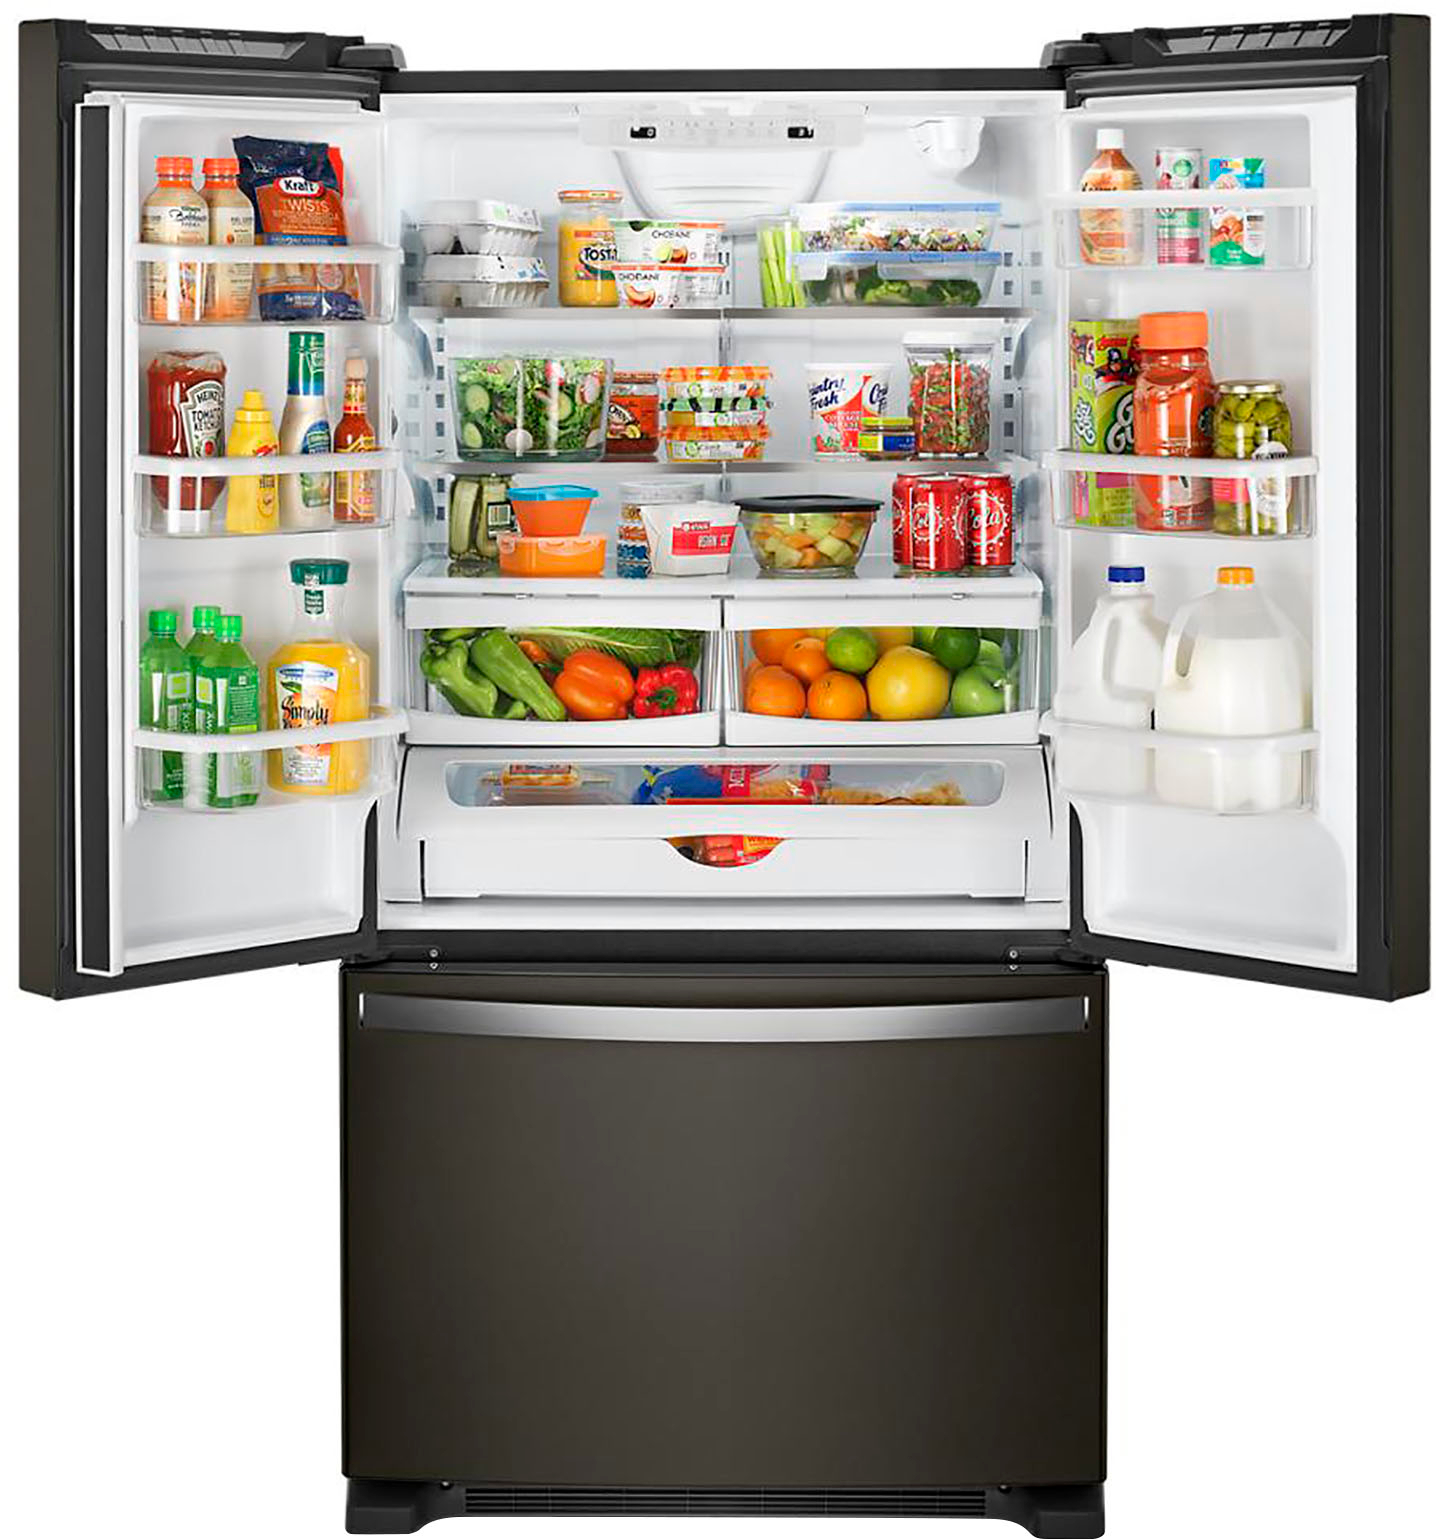 Angle View: Whirlpool - 25.2 Cu. Ft. French Door Refrigerator with Internal Water Dispenser - Black Stainless Steel